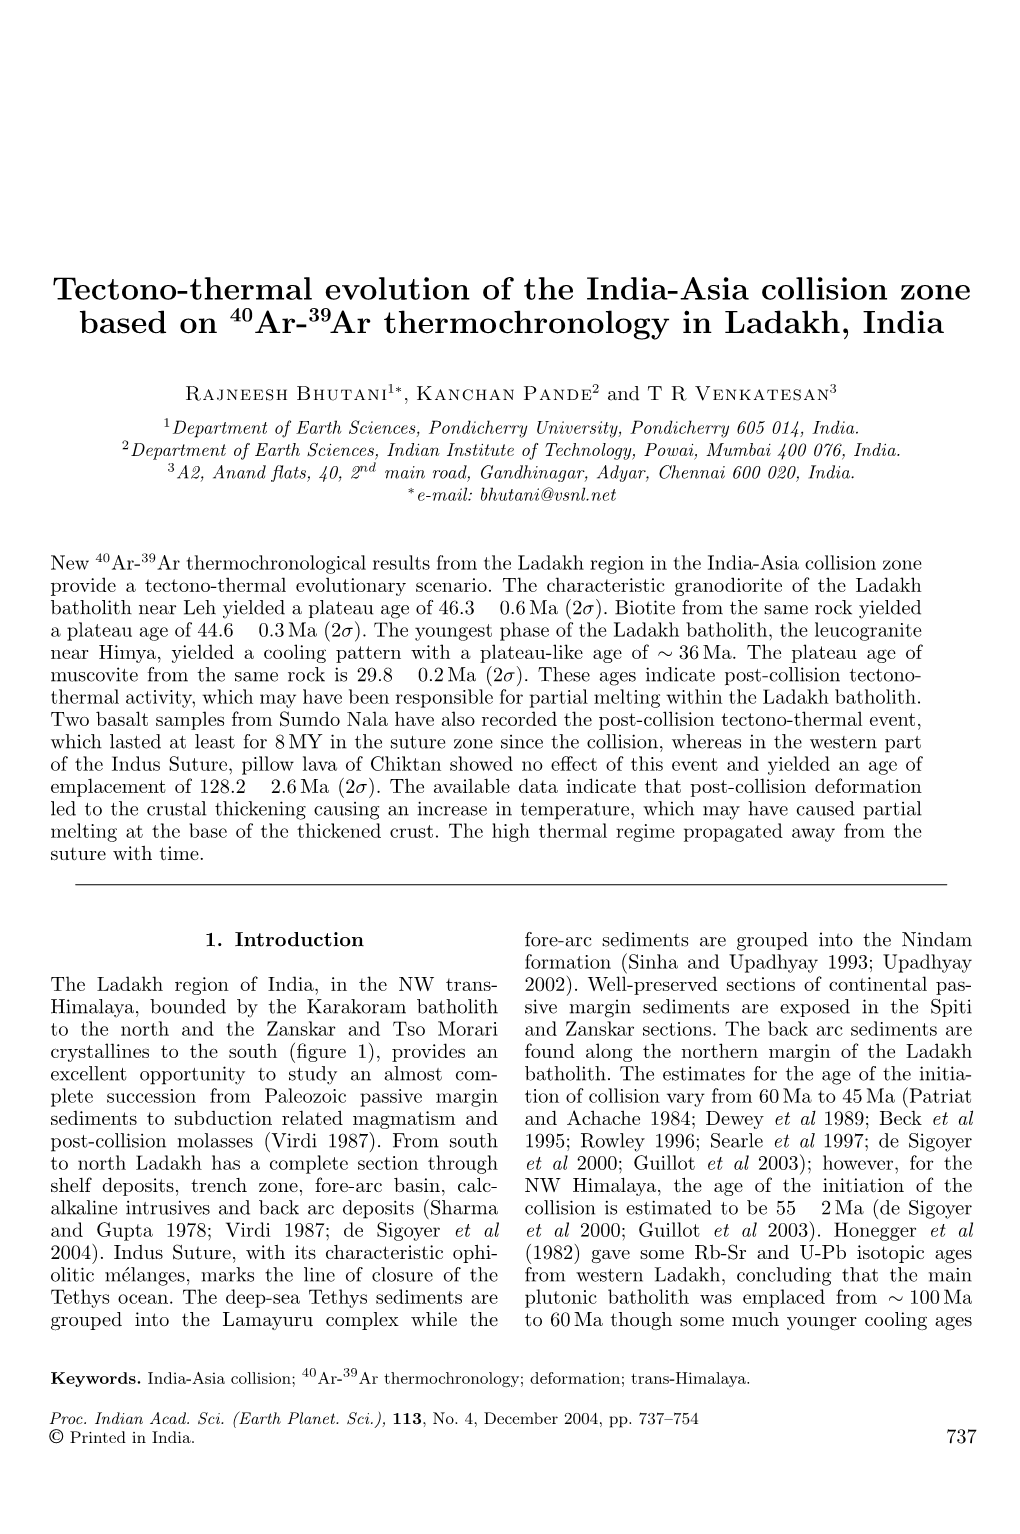 Tectono-Thermal Evolution of the India-Asia Collision Zone Based on 40Ar-39Ar Thermochronology in Ladakh, India